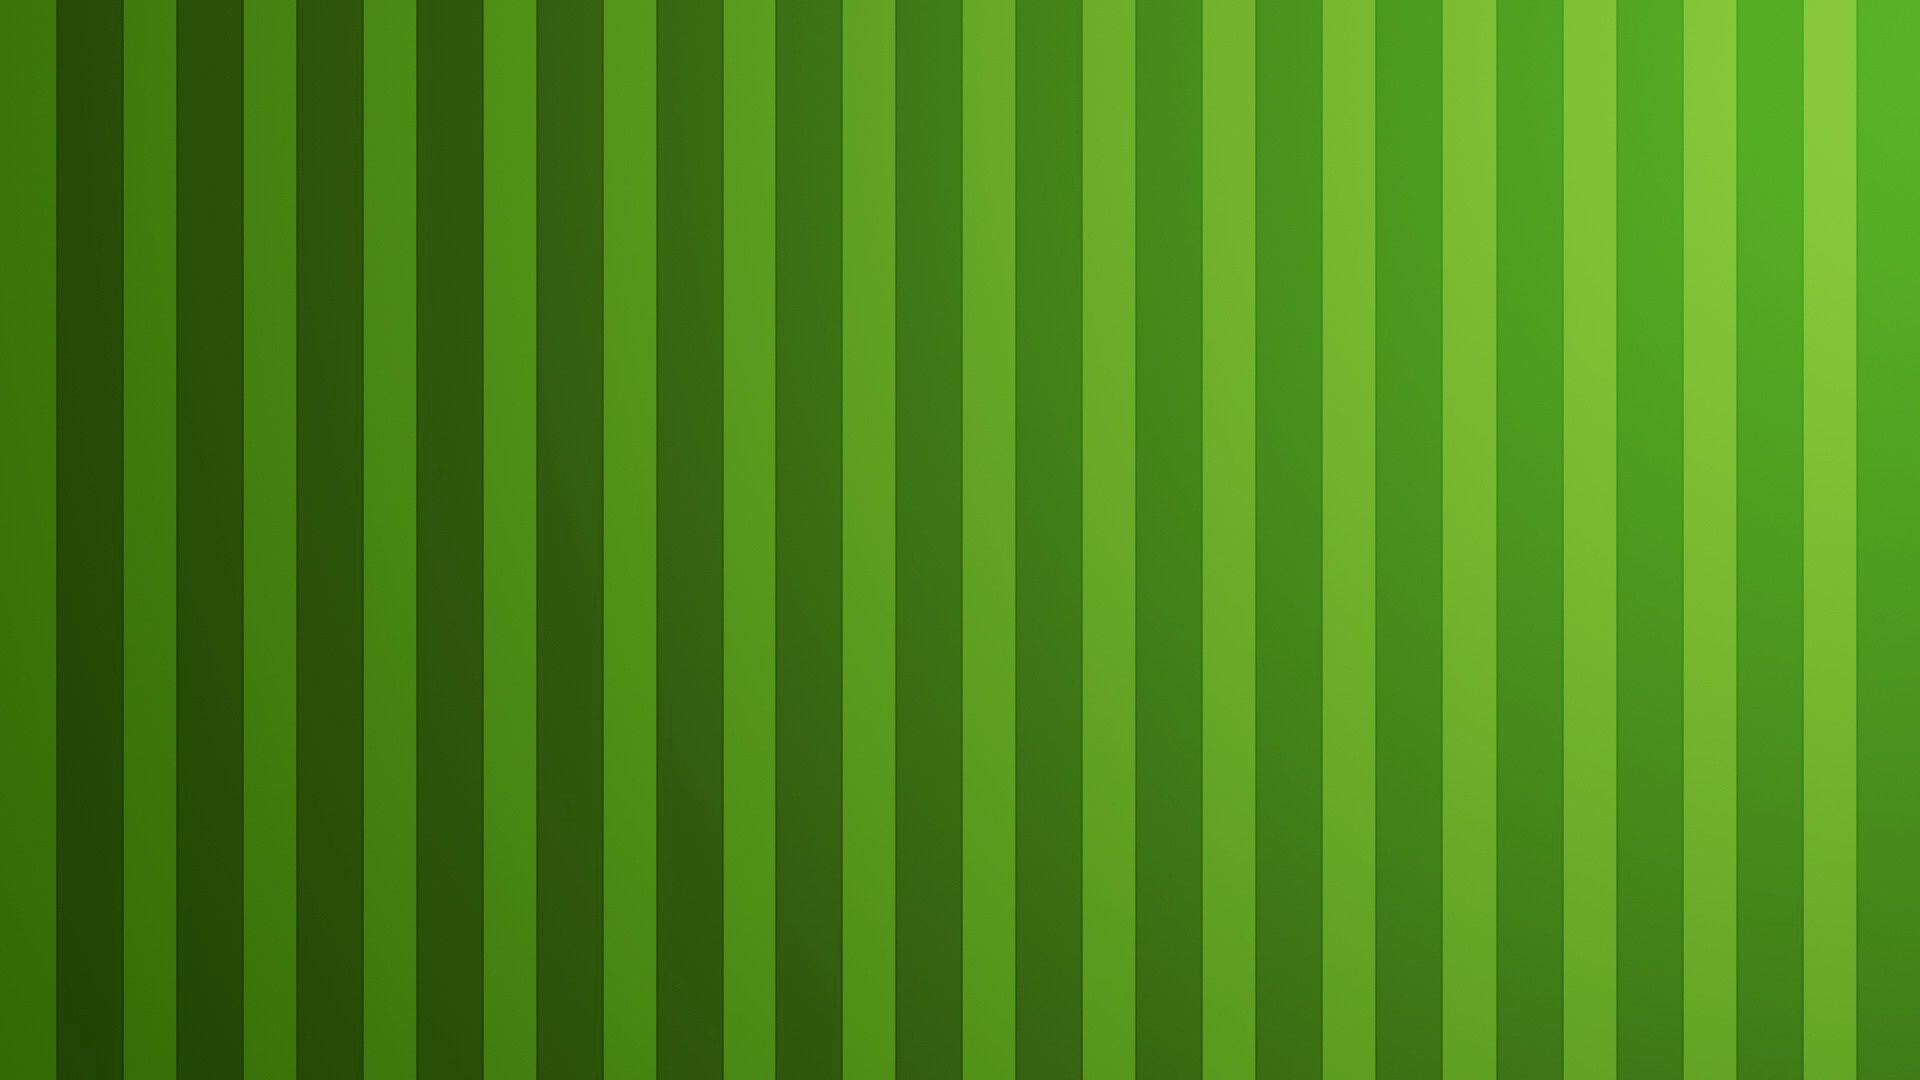 73612 Screensavers and Wallpapers Vertical for phone. Download streaks, vertical, stripes, abstract, green, lines pictures for free